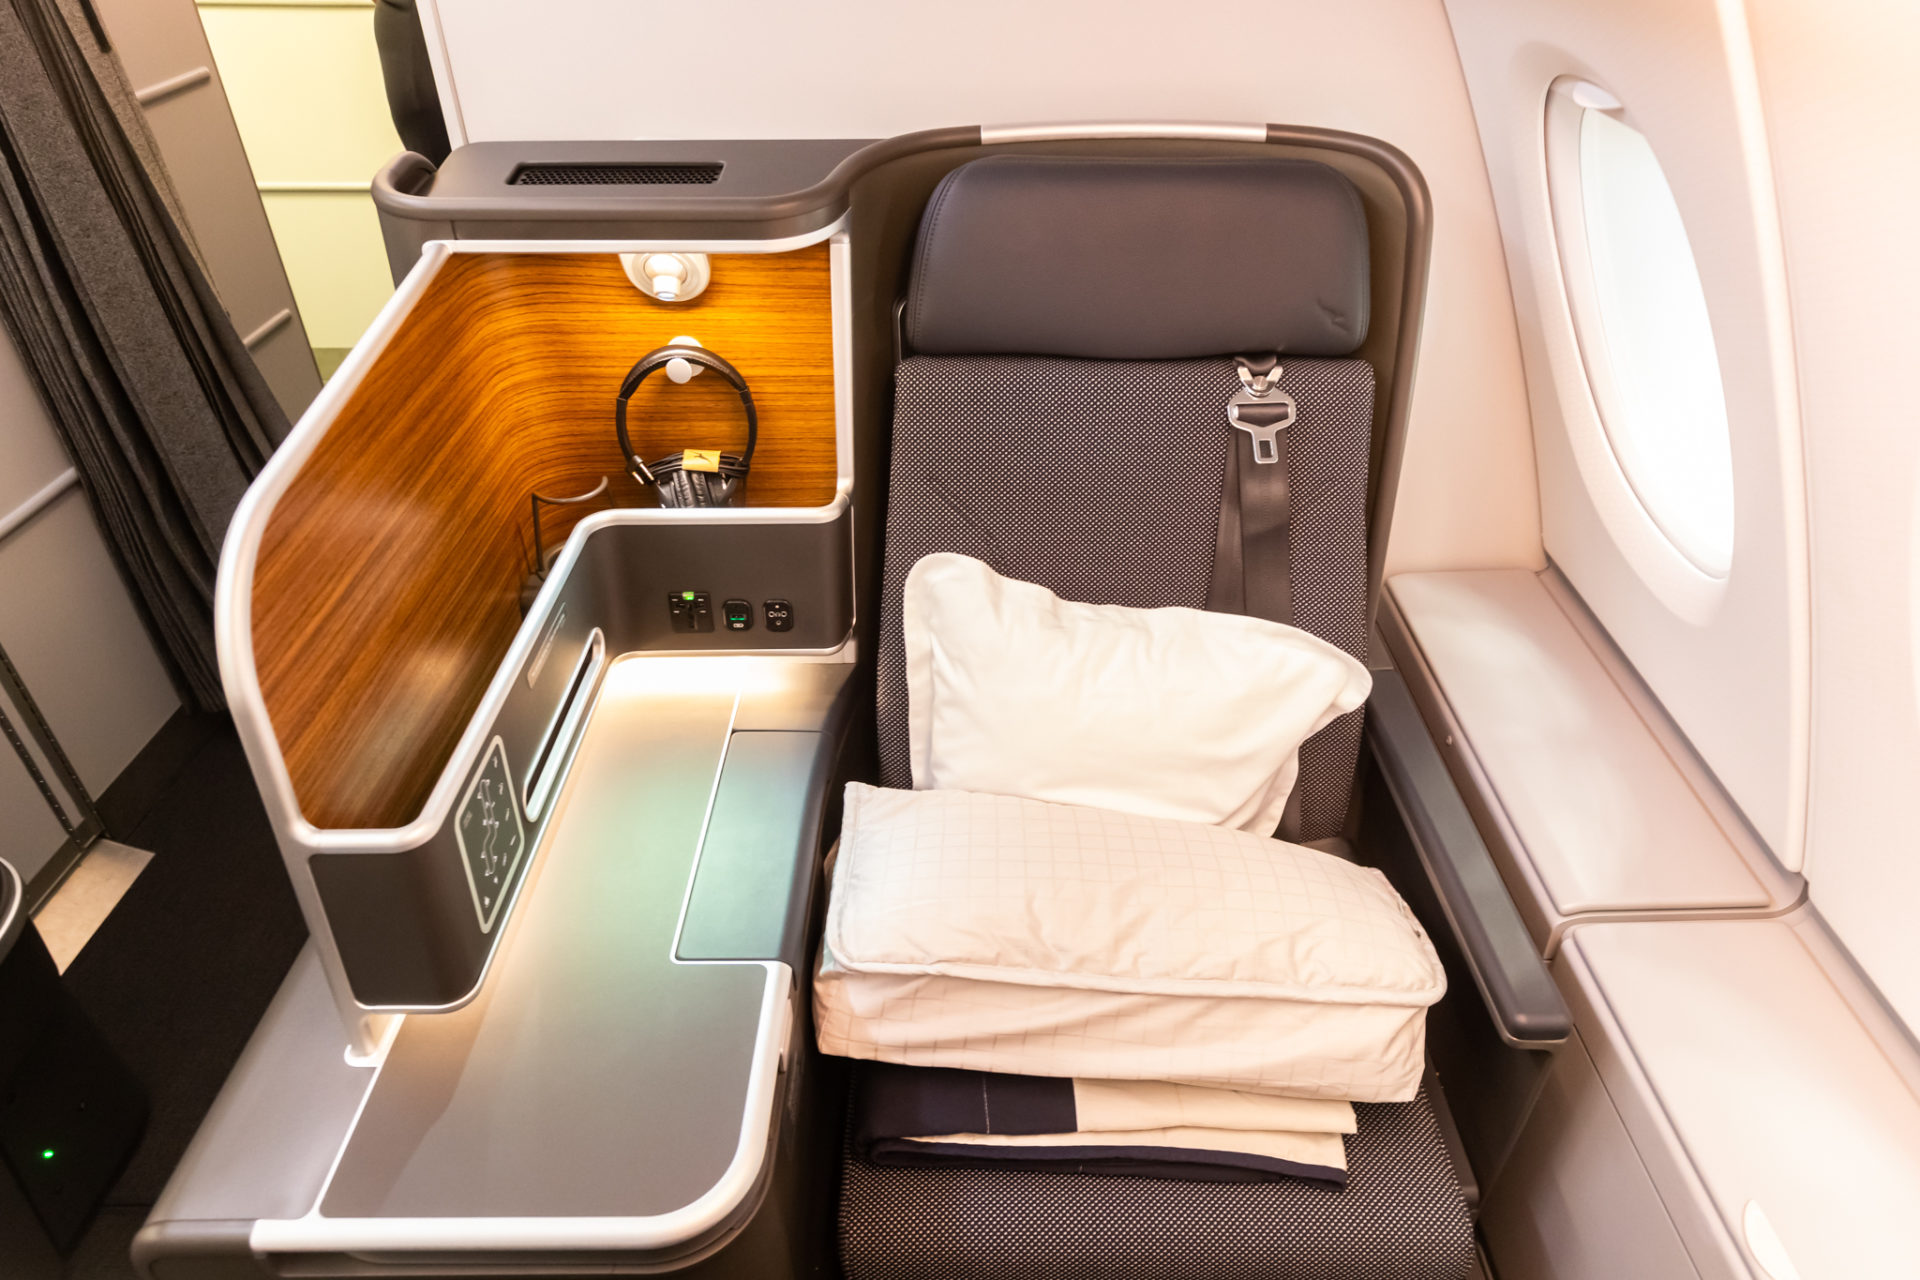 Up Close And Personal With Qantas New A380 Cabins Points From The Pacific 6829